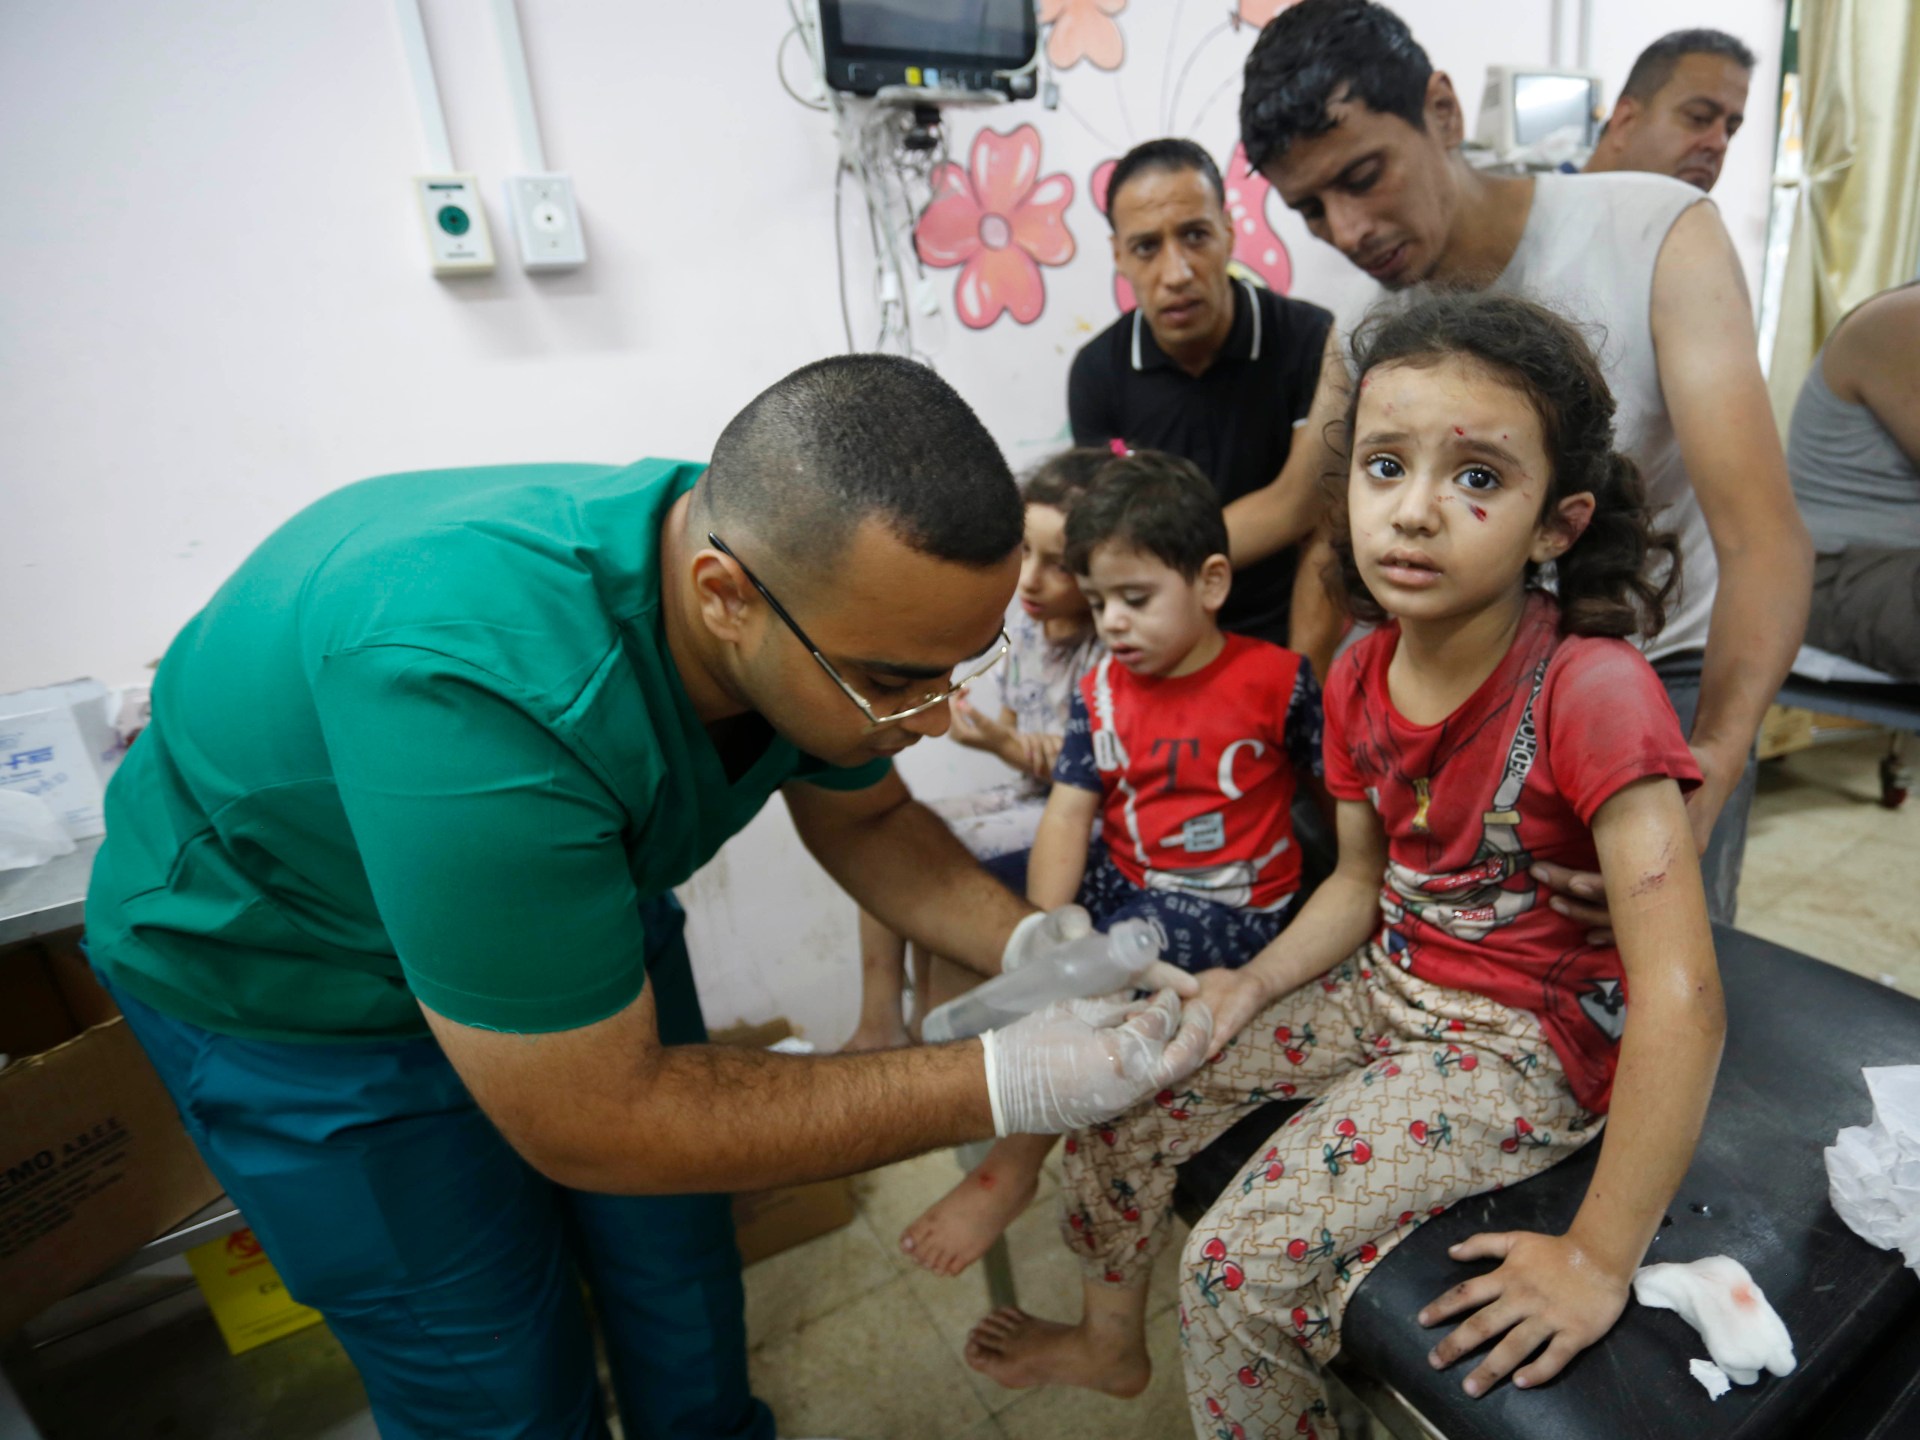 As genocide rages, doctors must choose: Care or collaborationism | Israel-Palestine conflict